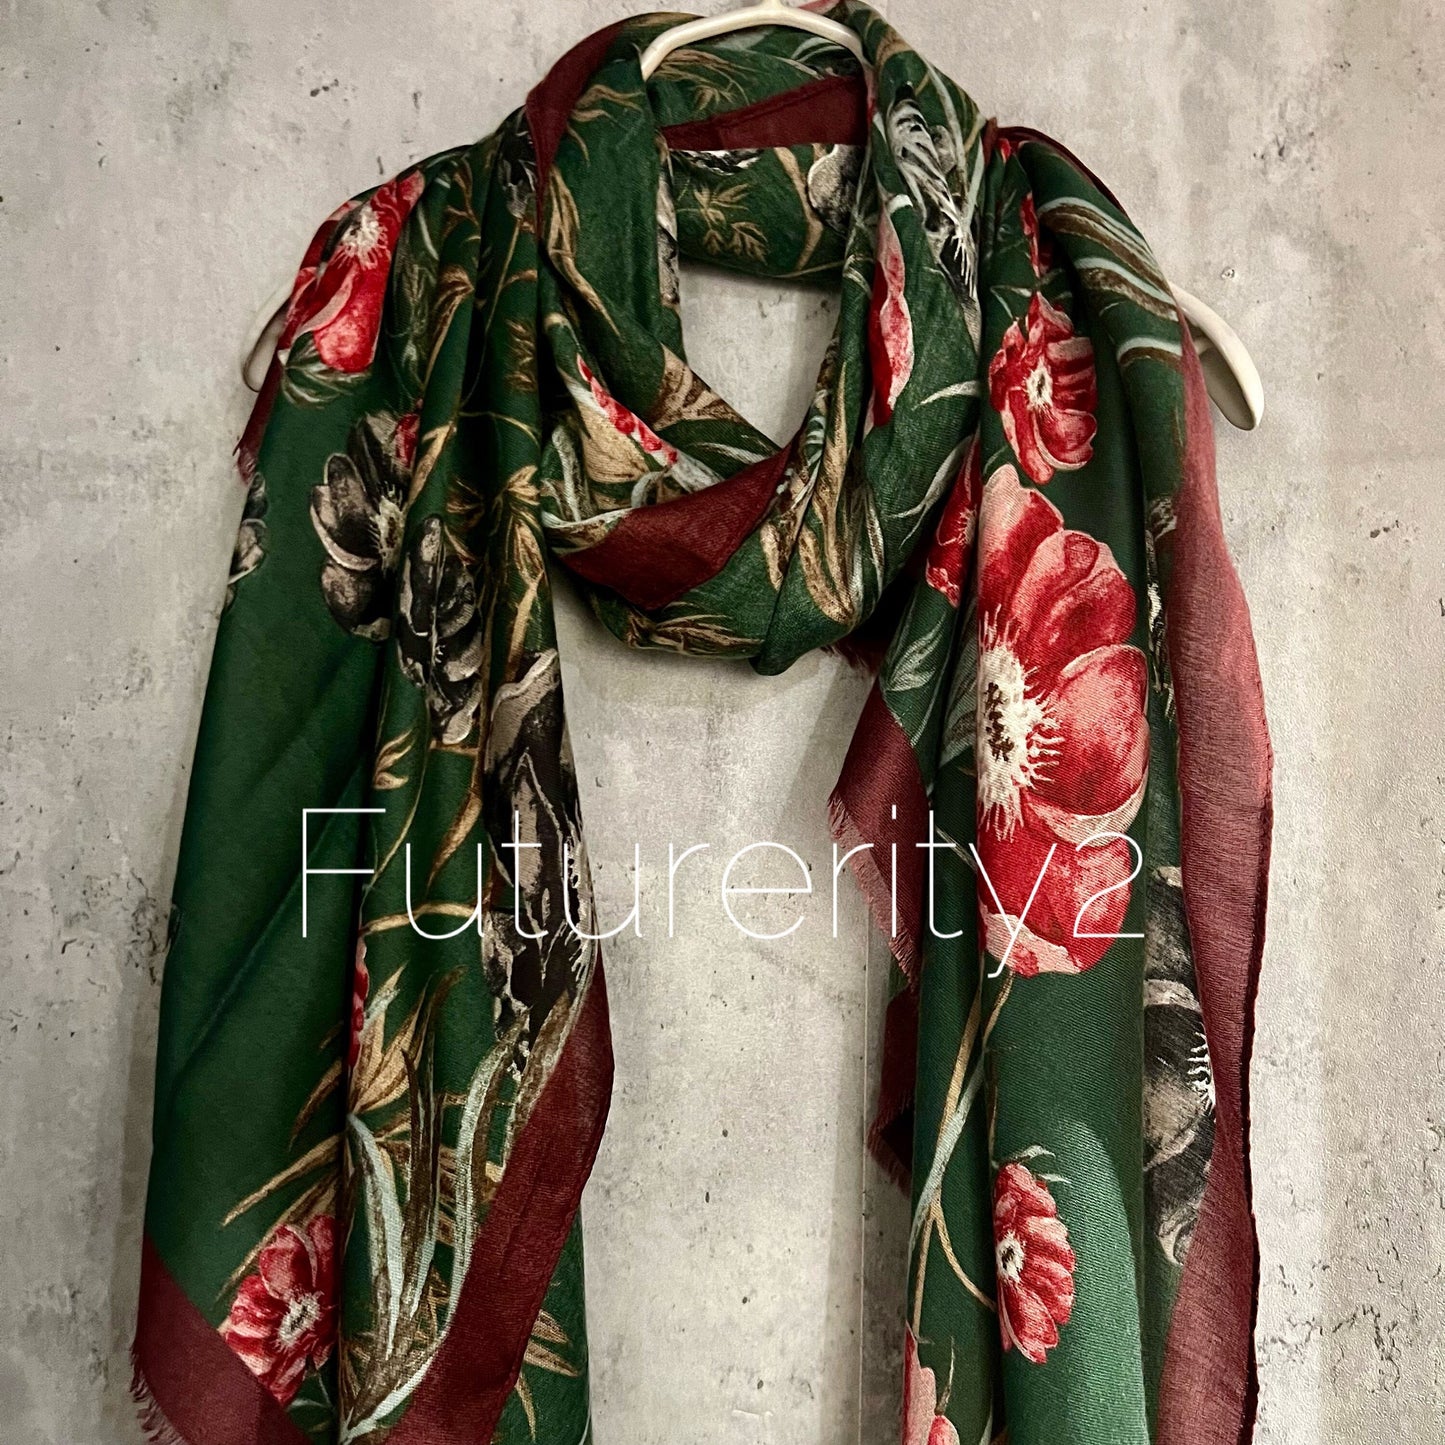 Vintage Poppy Flowers Green  Cotton Scarf/Summer Autumn Scarf/Gifts For Her/Scarf Women/Gifts For Mum/Christmas Birthday Gifts/UK Seller